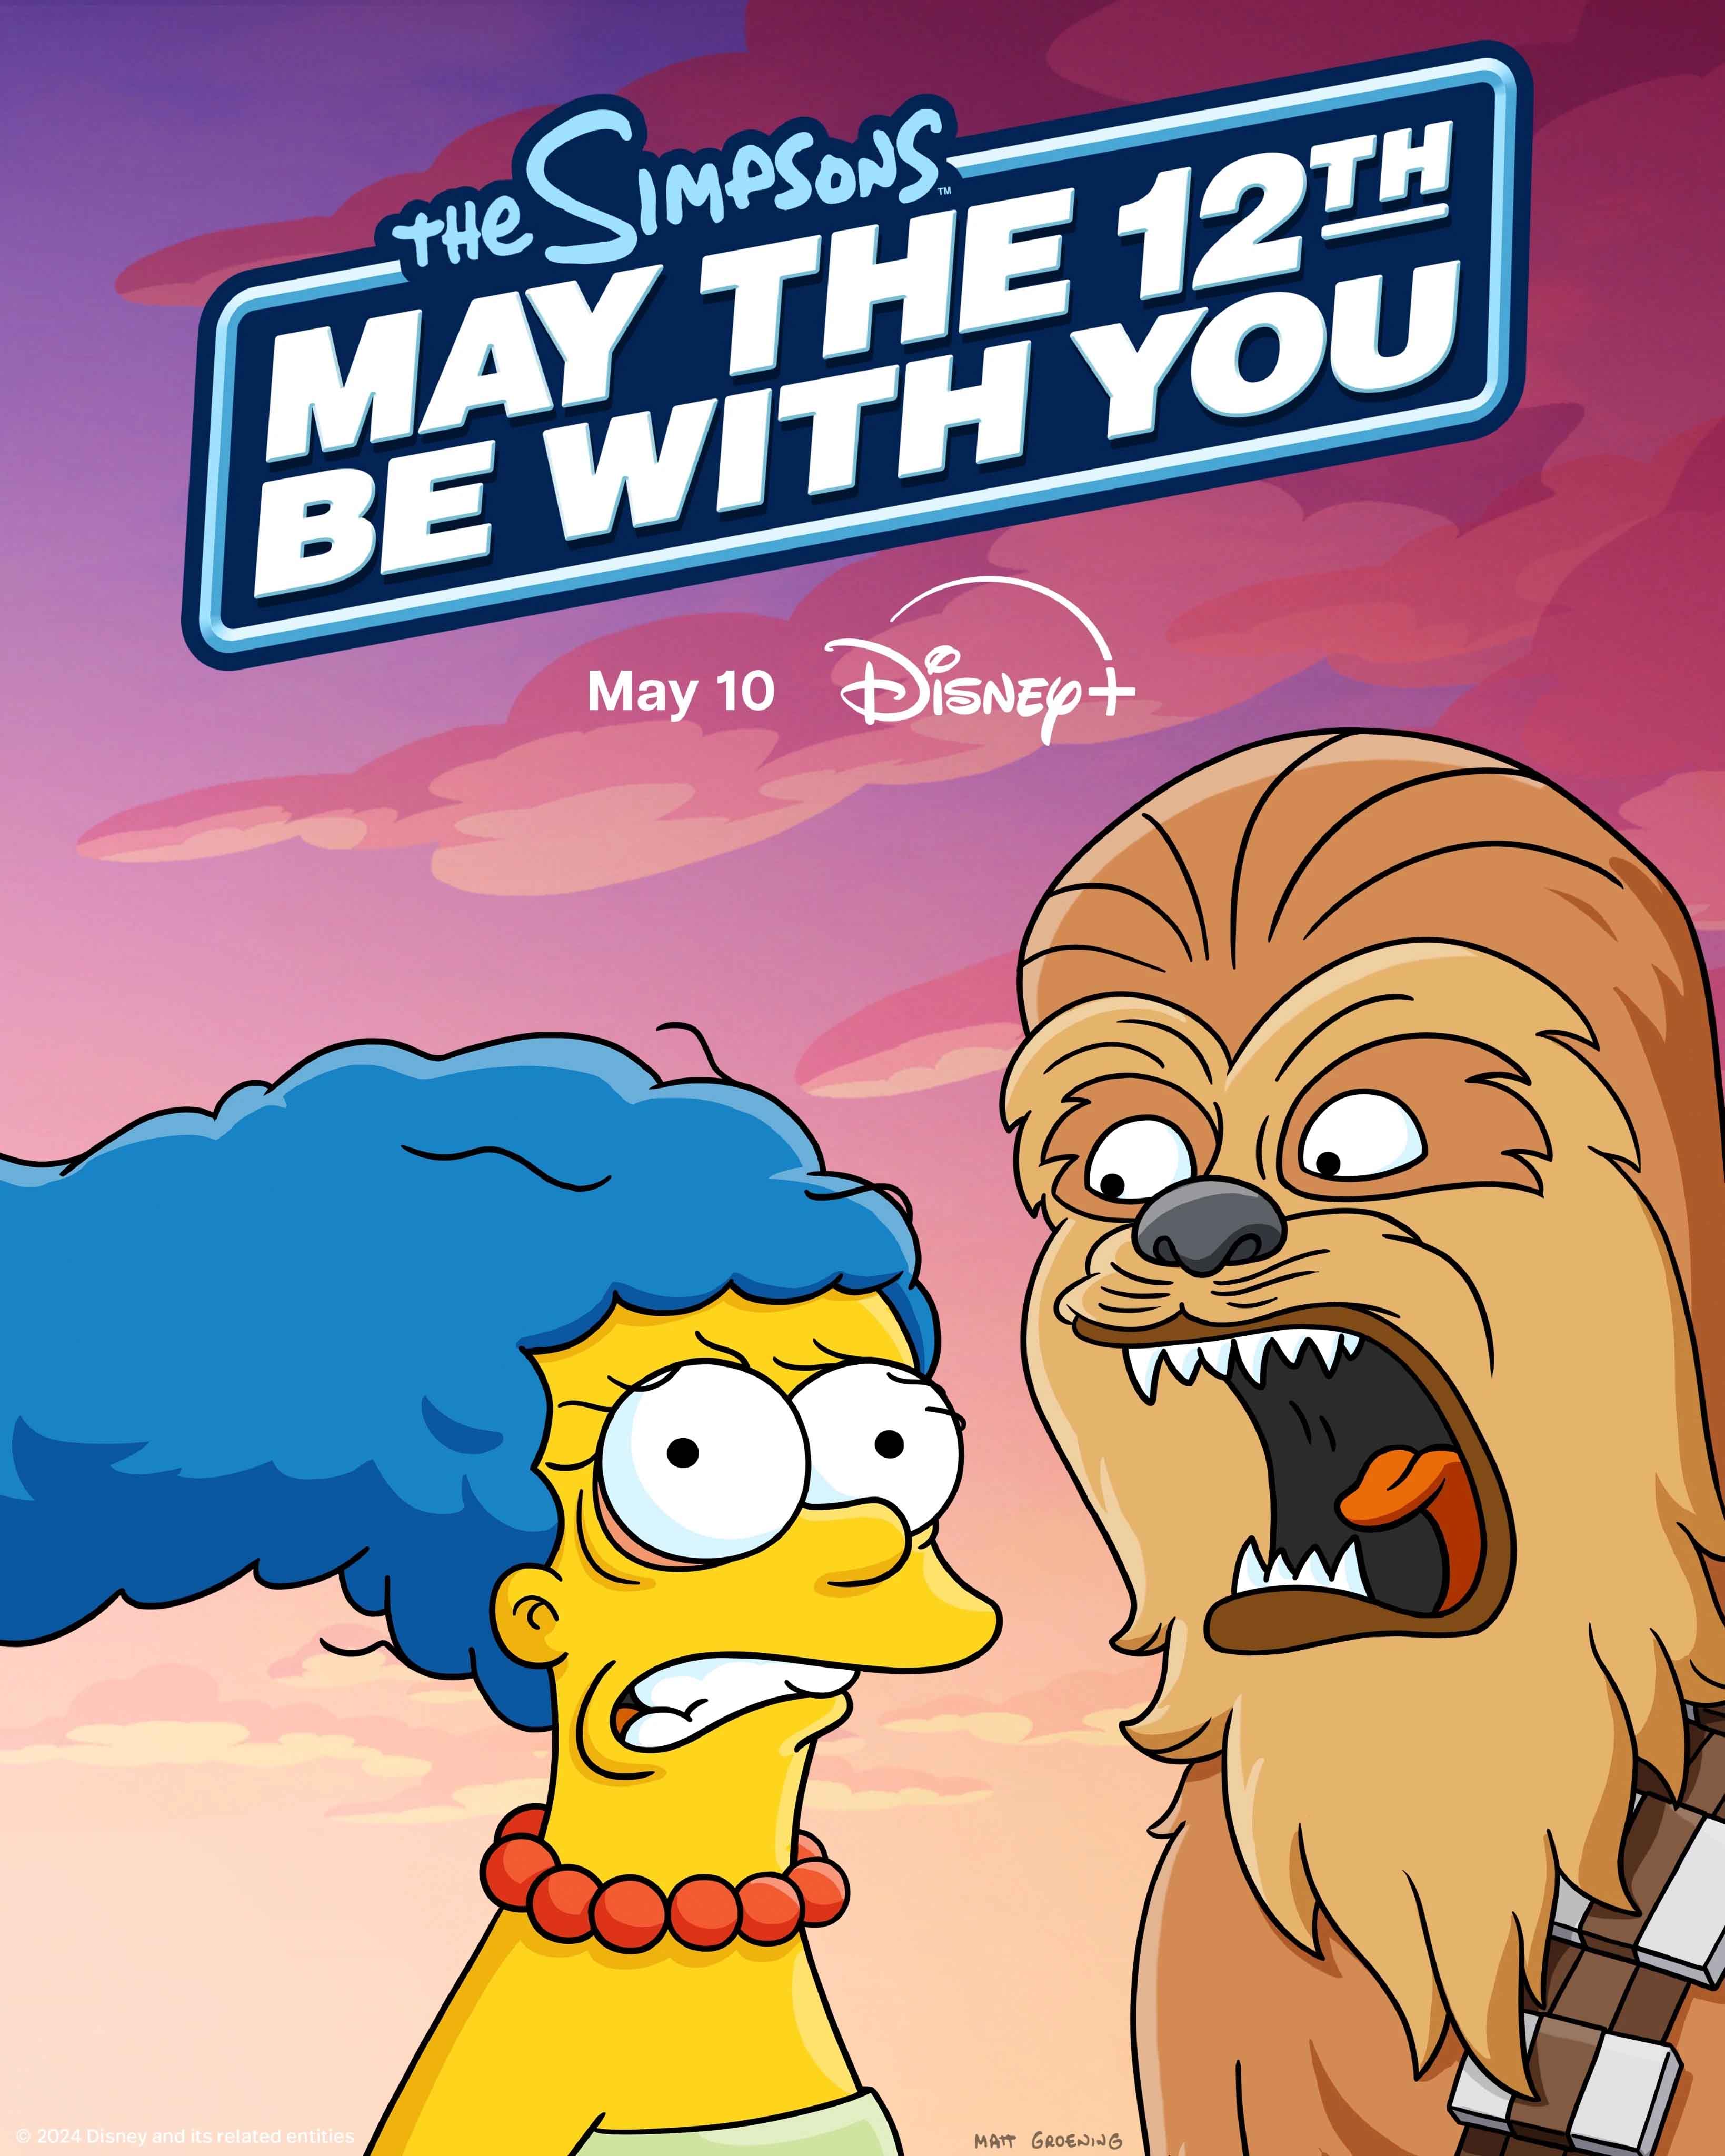 The-Simpsons-May_the_12th_Be_With_You_Poster